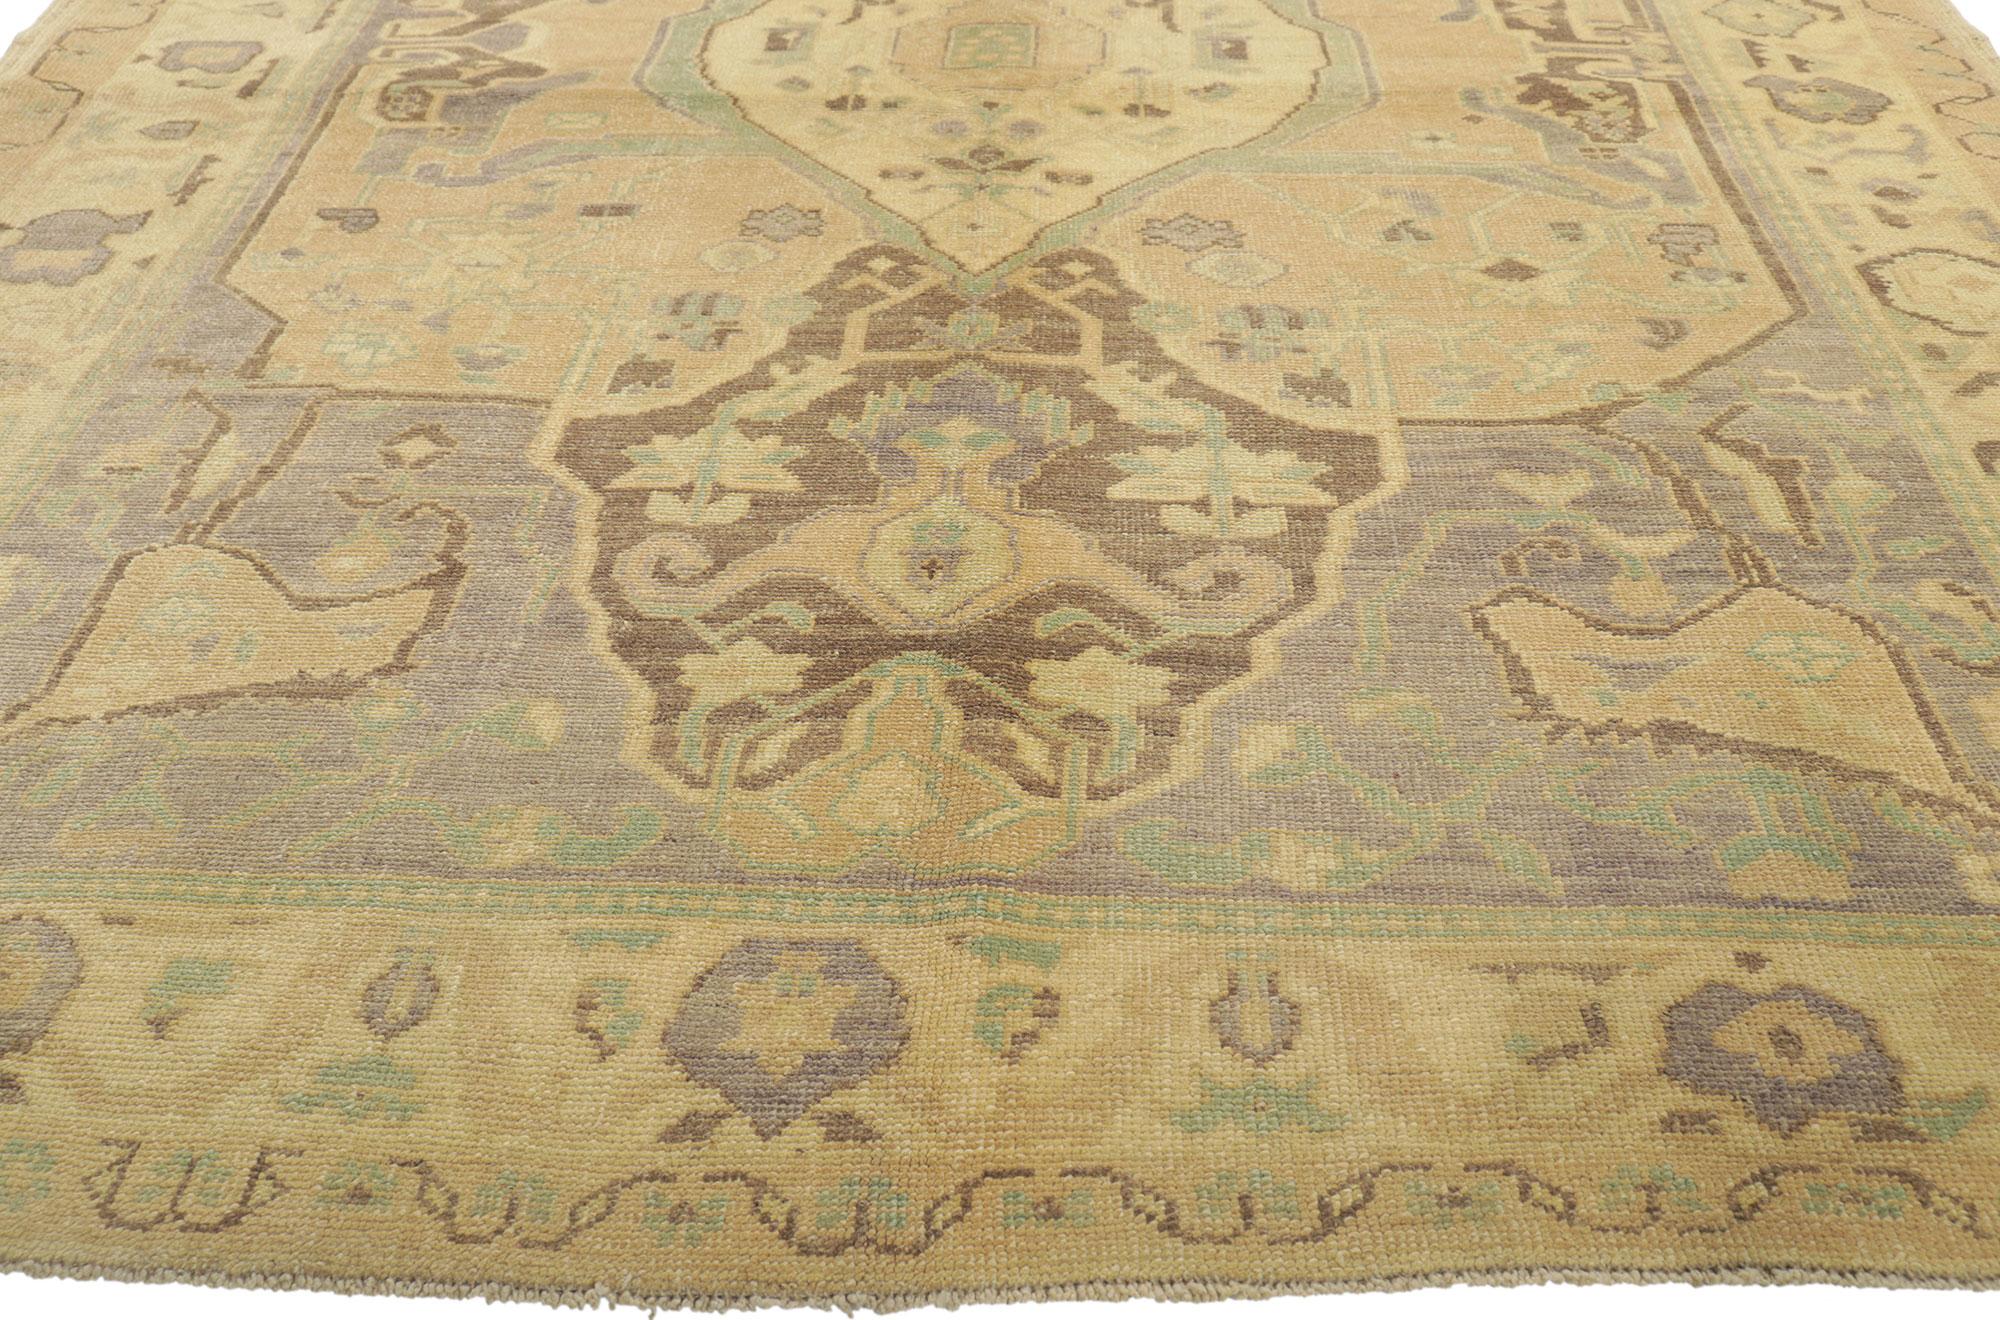 Vintage Turkish Oushak Rug, Biophilic Design Meets Quiet Sophistication In Good Condition For Sale In Dallas, TX